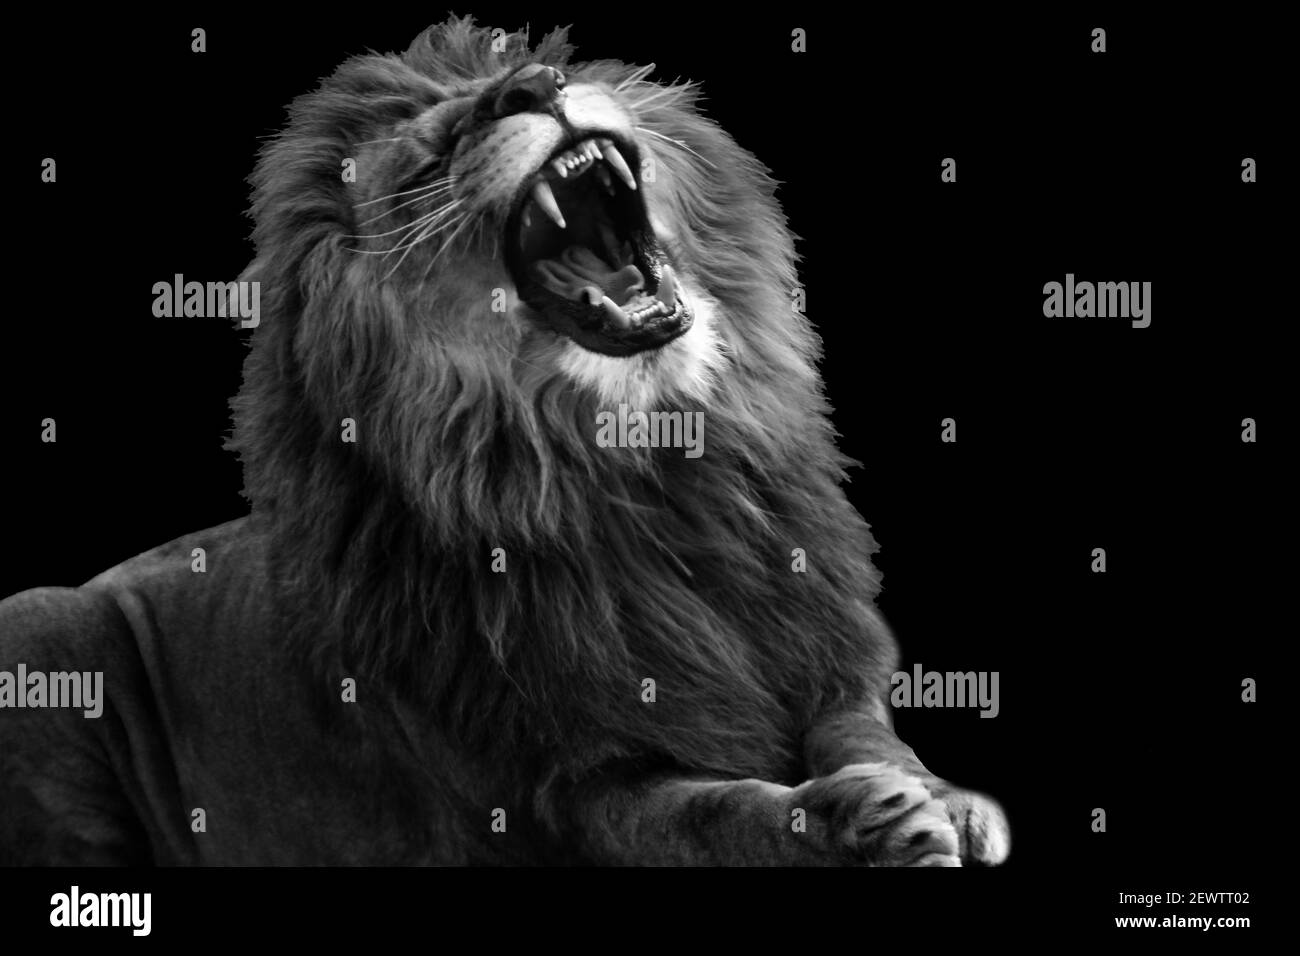 black and white Close Up Of Roaring Lion king isolated on black. Stock Photo